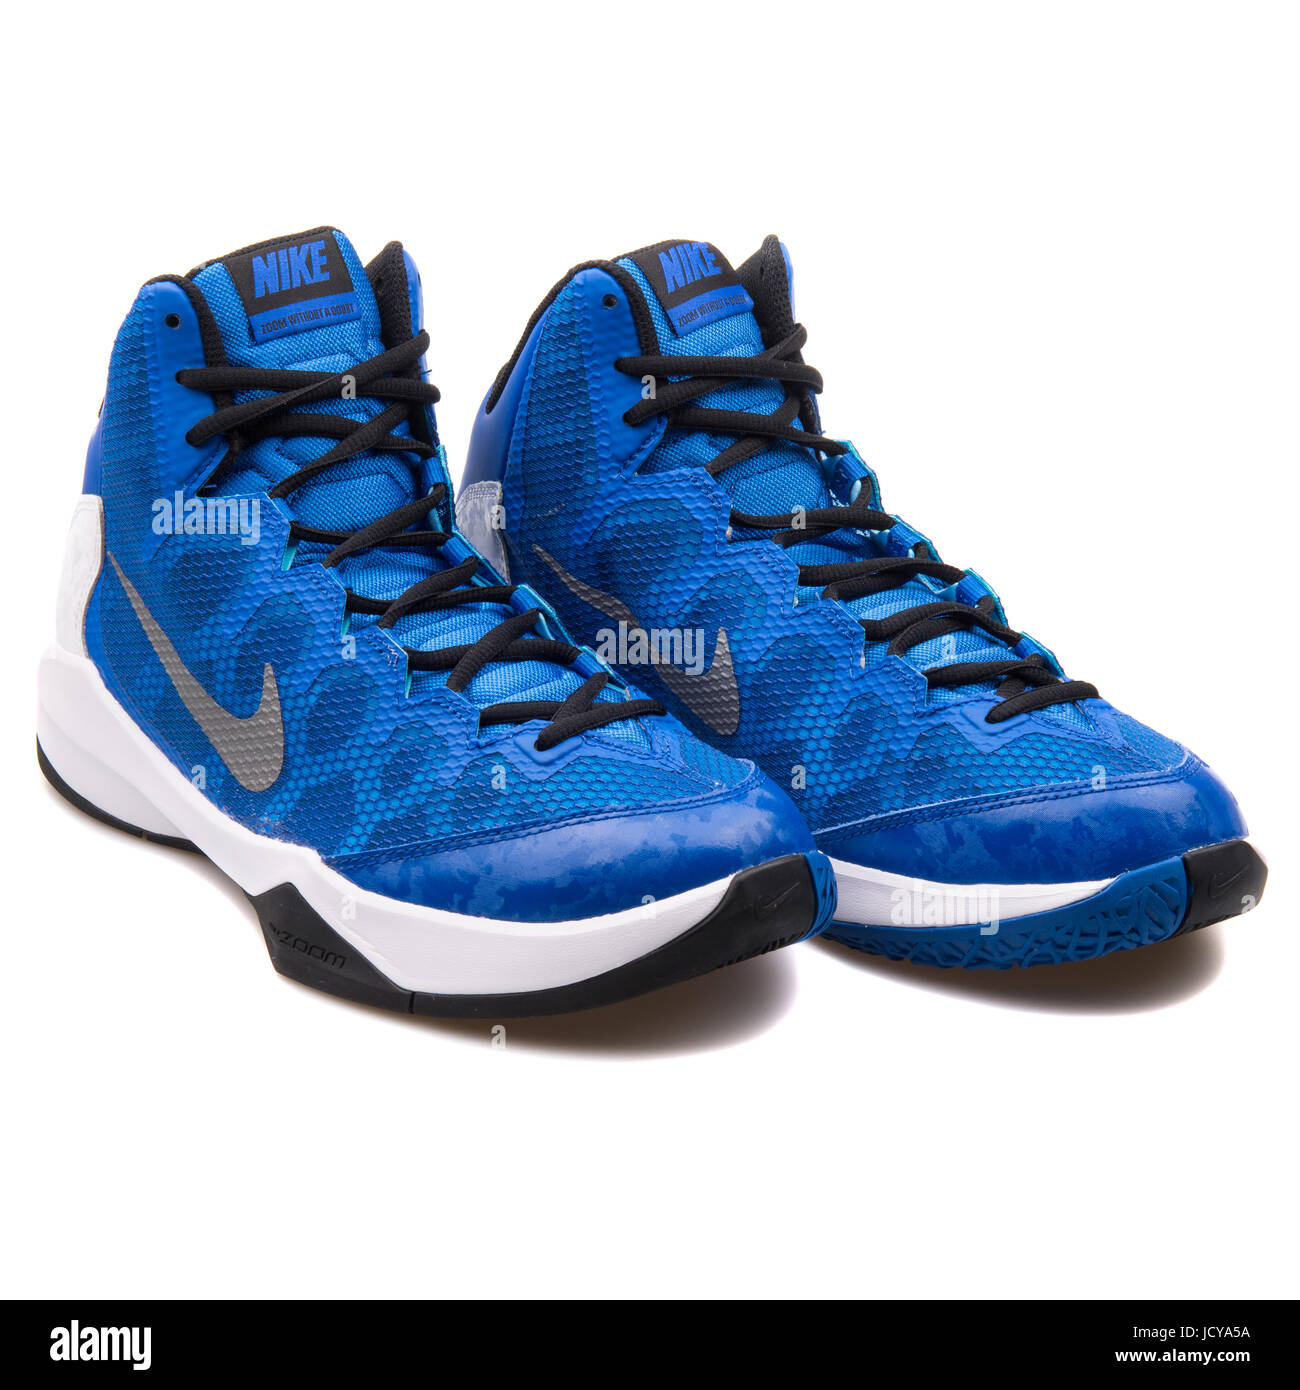 Coherent freedom Locomotive Nike Zoom Without A Doubt Royal Blue and White Men's Basketball Shoes -  749432-401 Stock Photo - Alamy